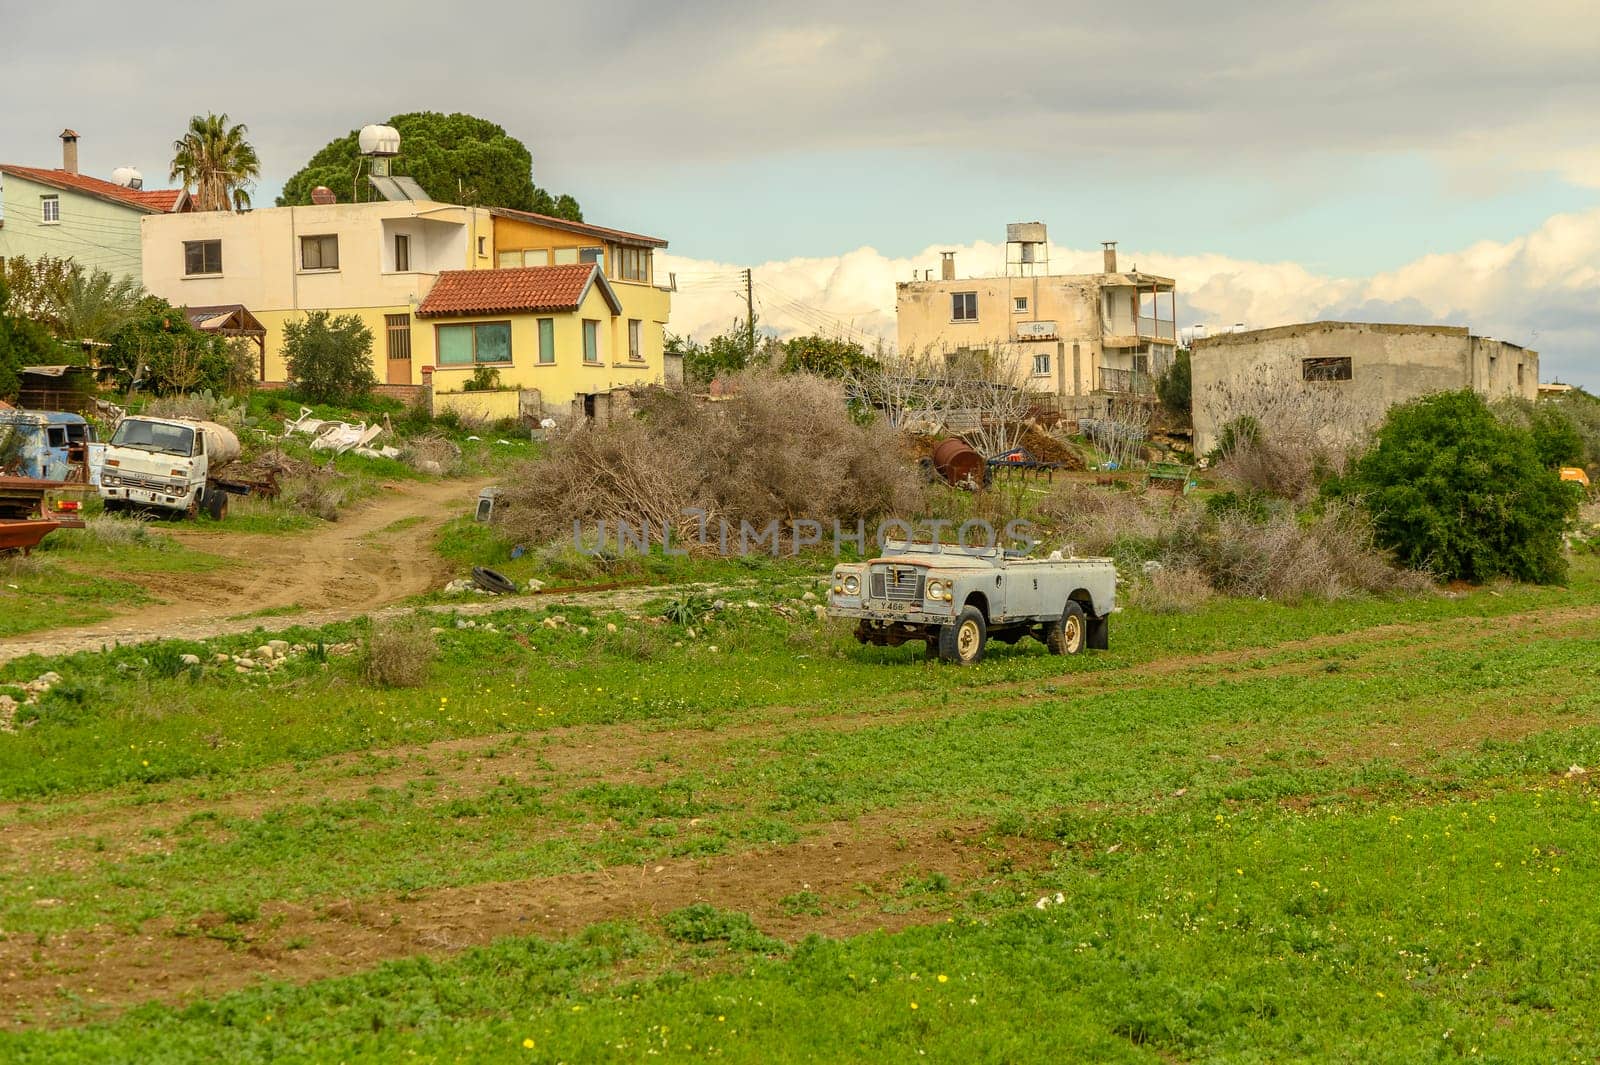 old landrover in a village in winter in cyprus 1 by Mixa74